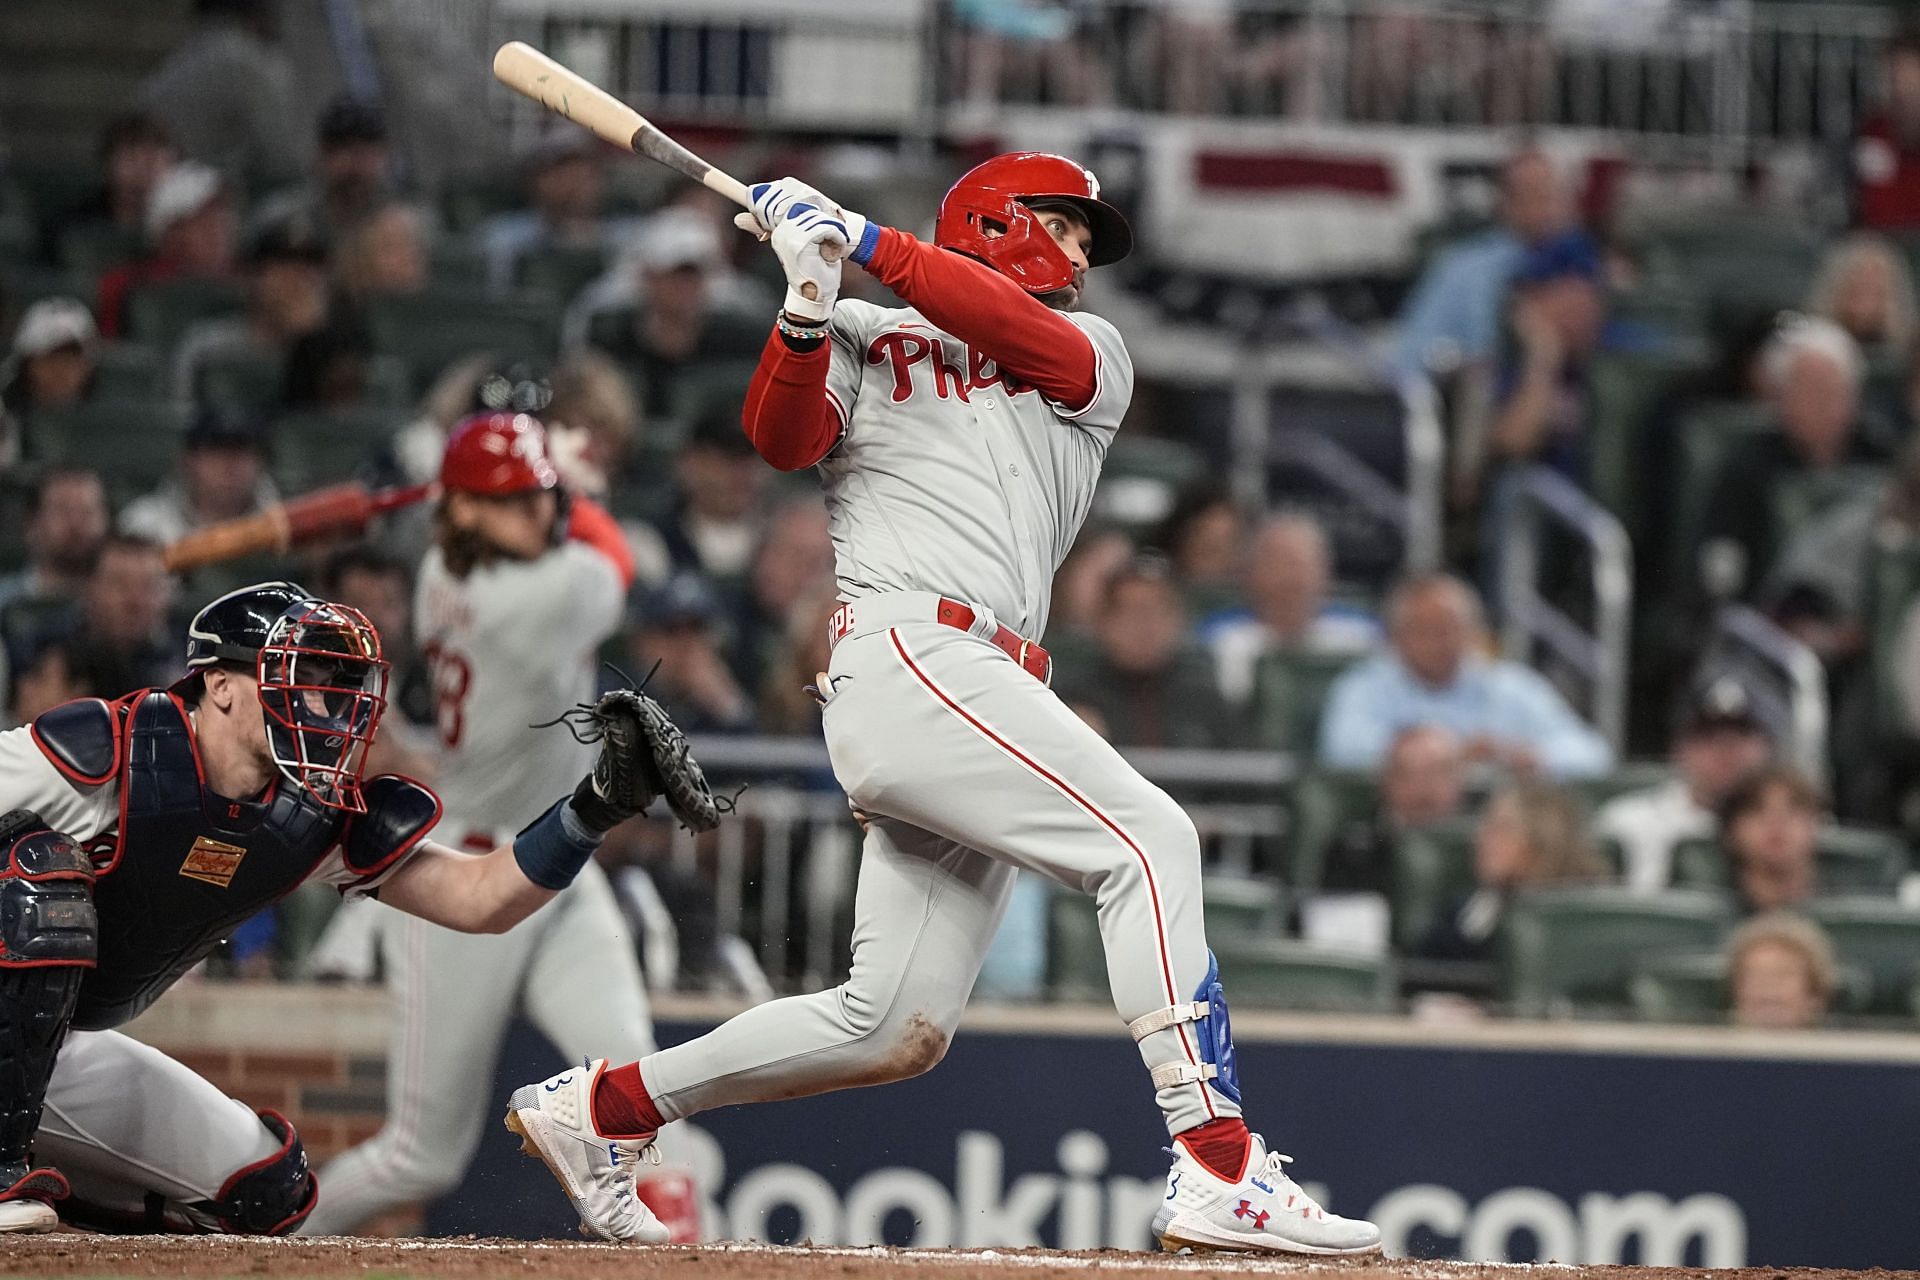 Bryce Harper has led the Phillies back to the postseason